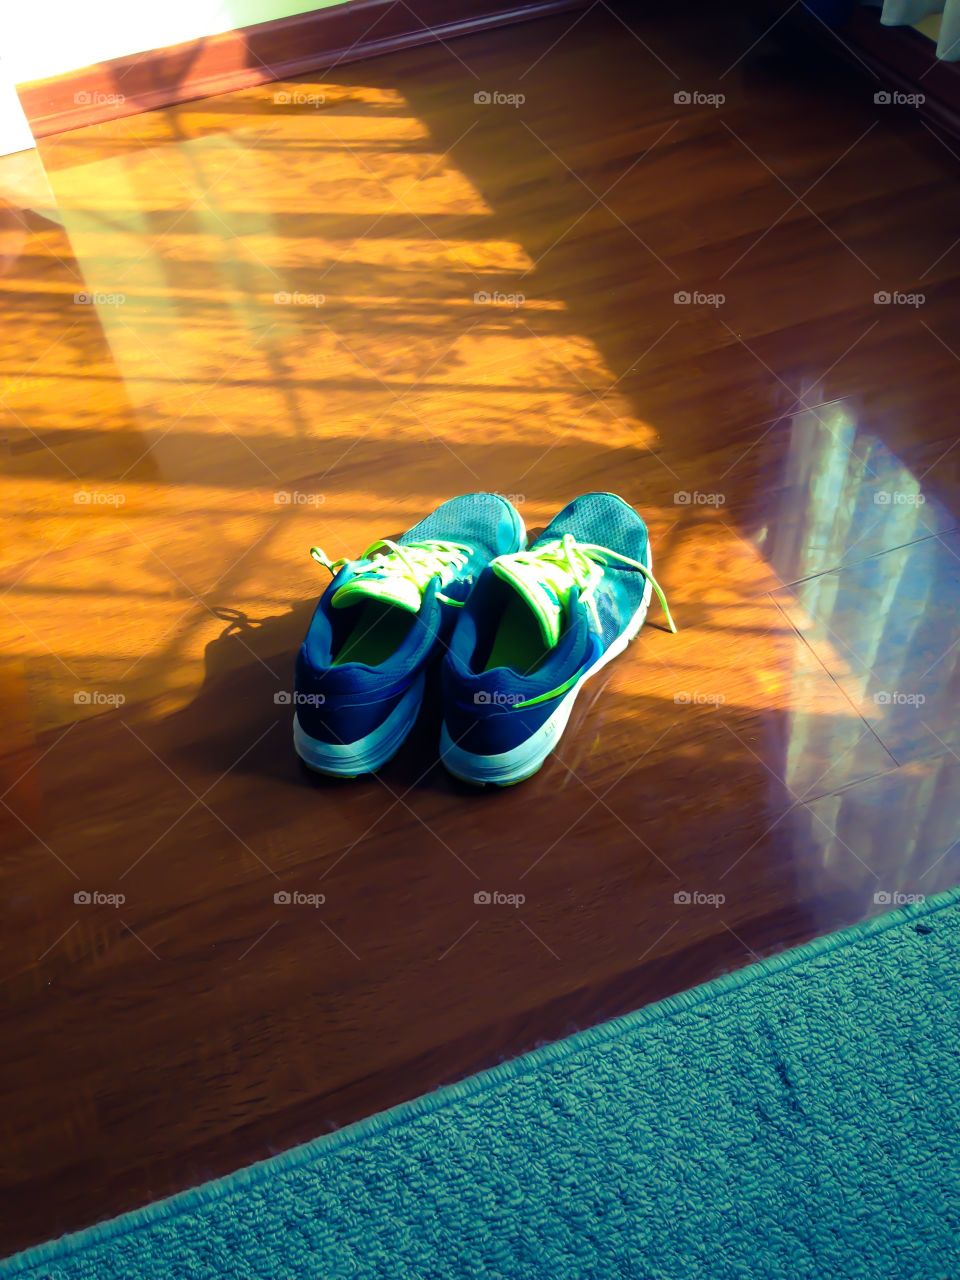 My partners. When you like sports and running then your sport shoes are more than a simple pair of them 